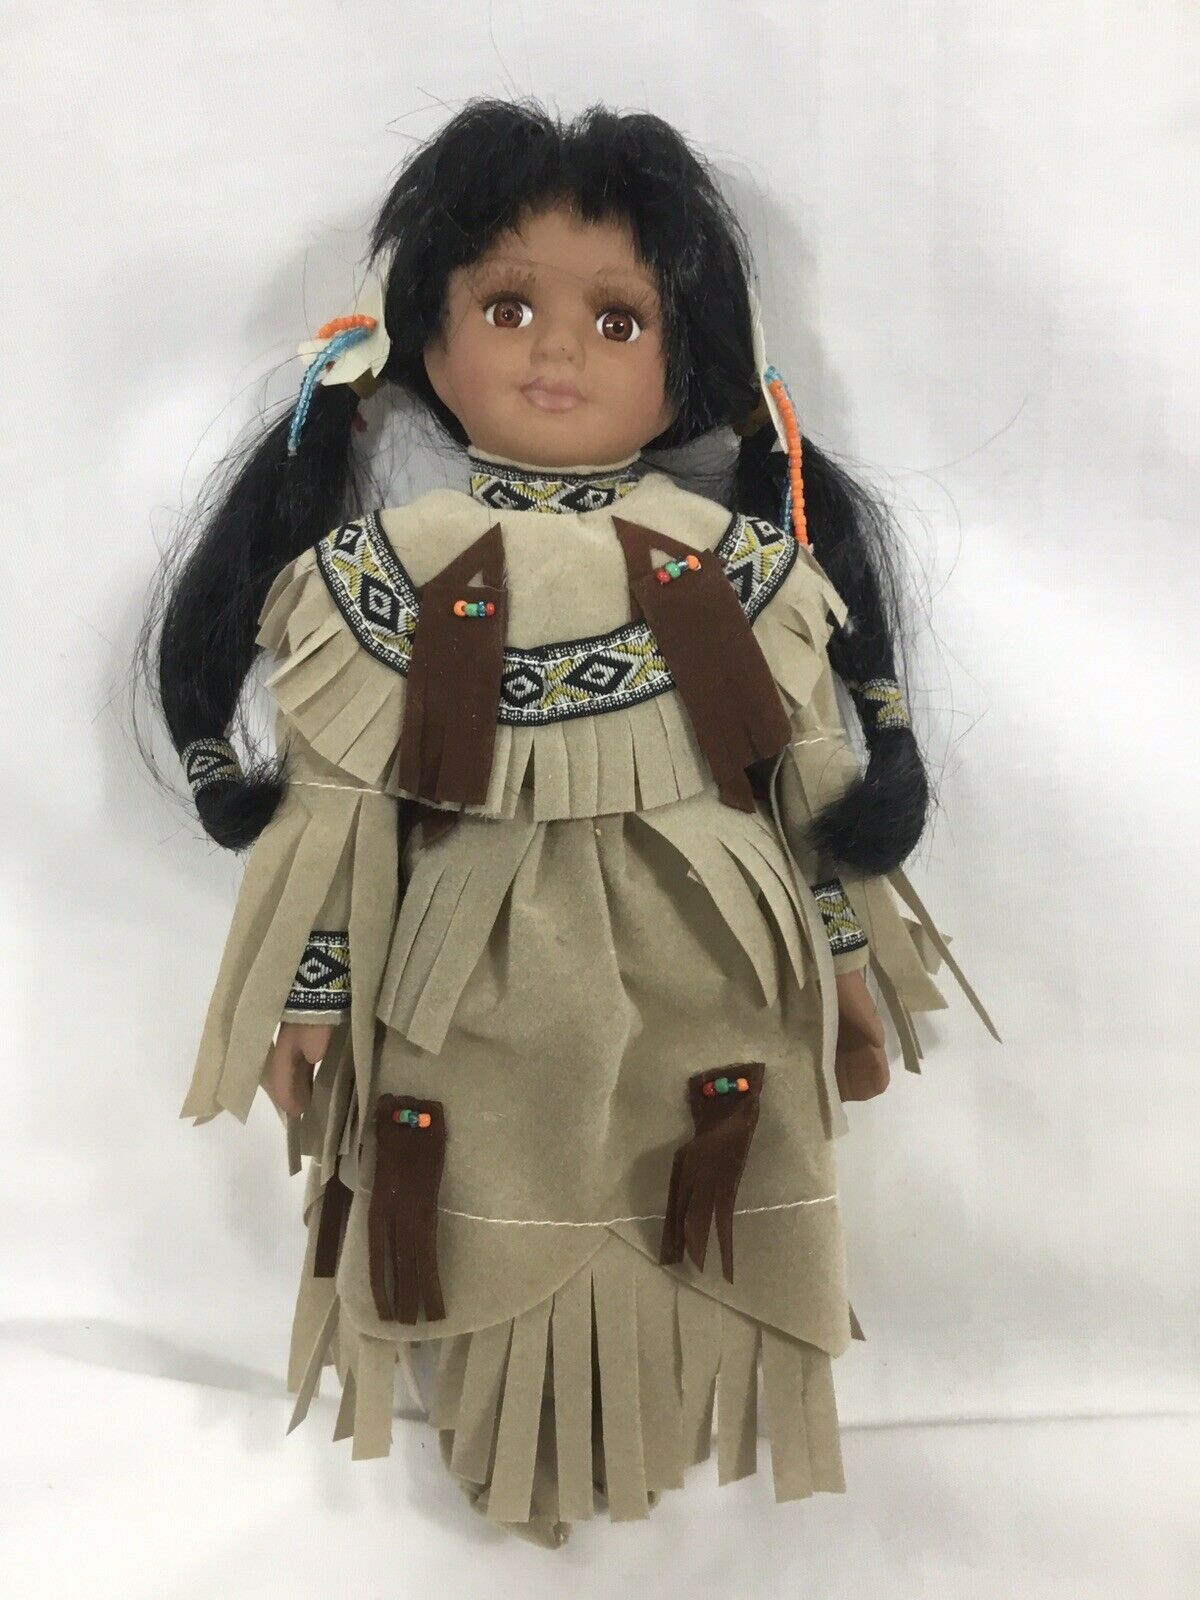 American Indian Porcelain Doll 8" Collectable